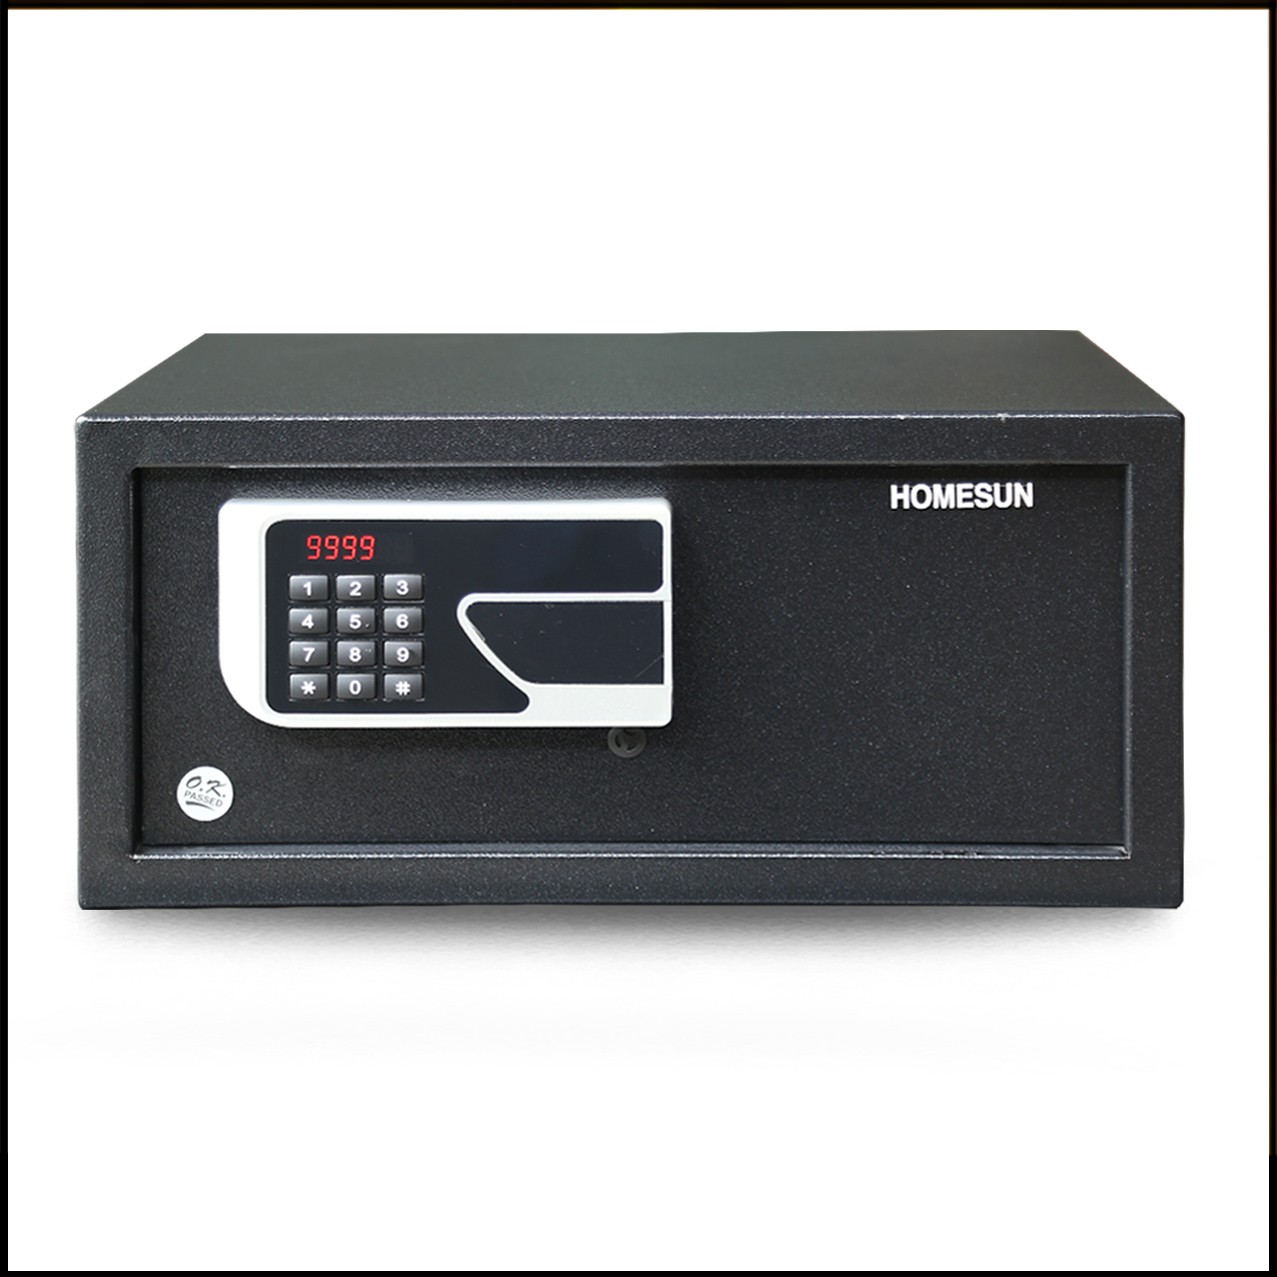 Hotel Safety Deposit Box Wholesale Suppliers - Manufacturers & Suppliers